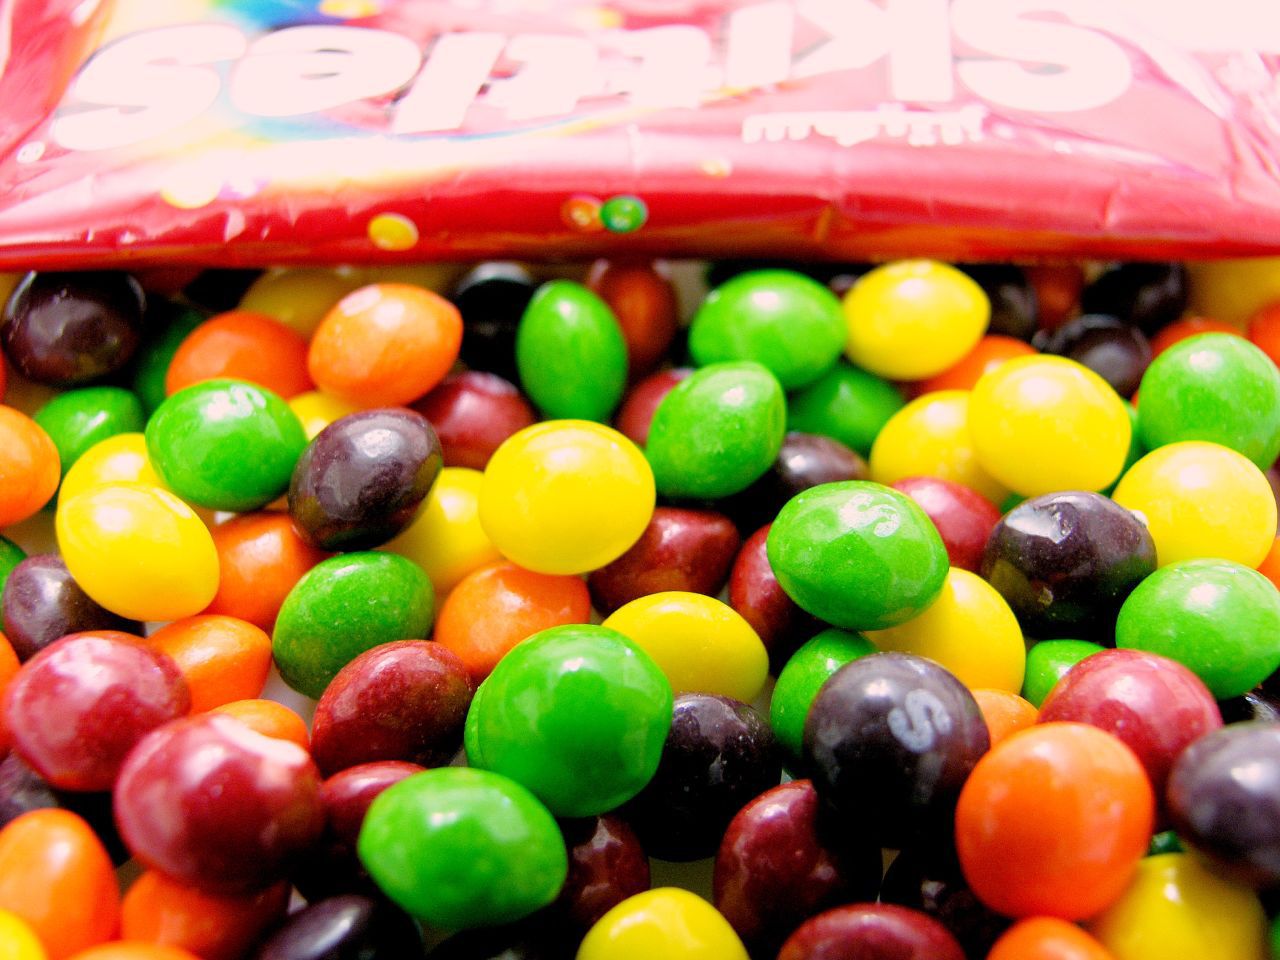 How do skittles end up as cattle feed?